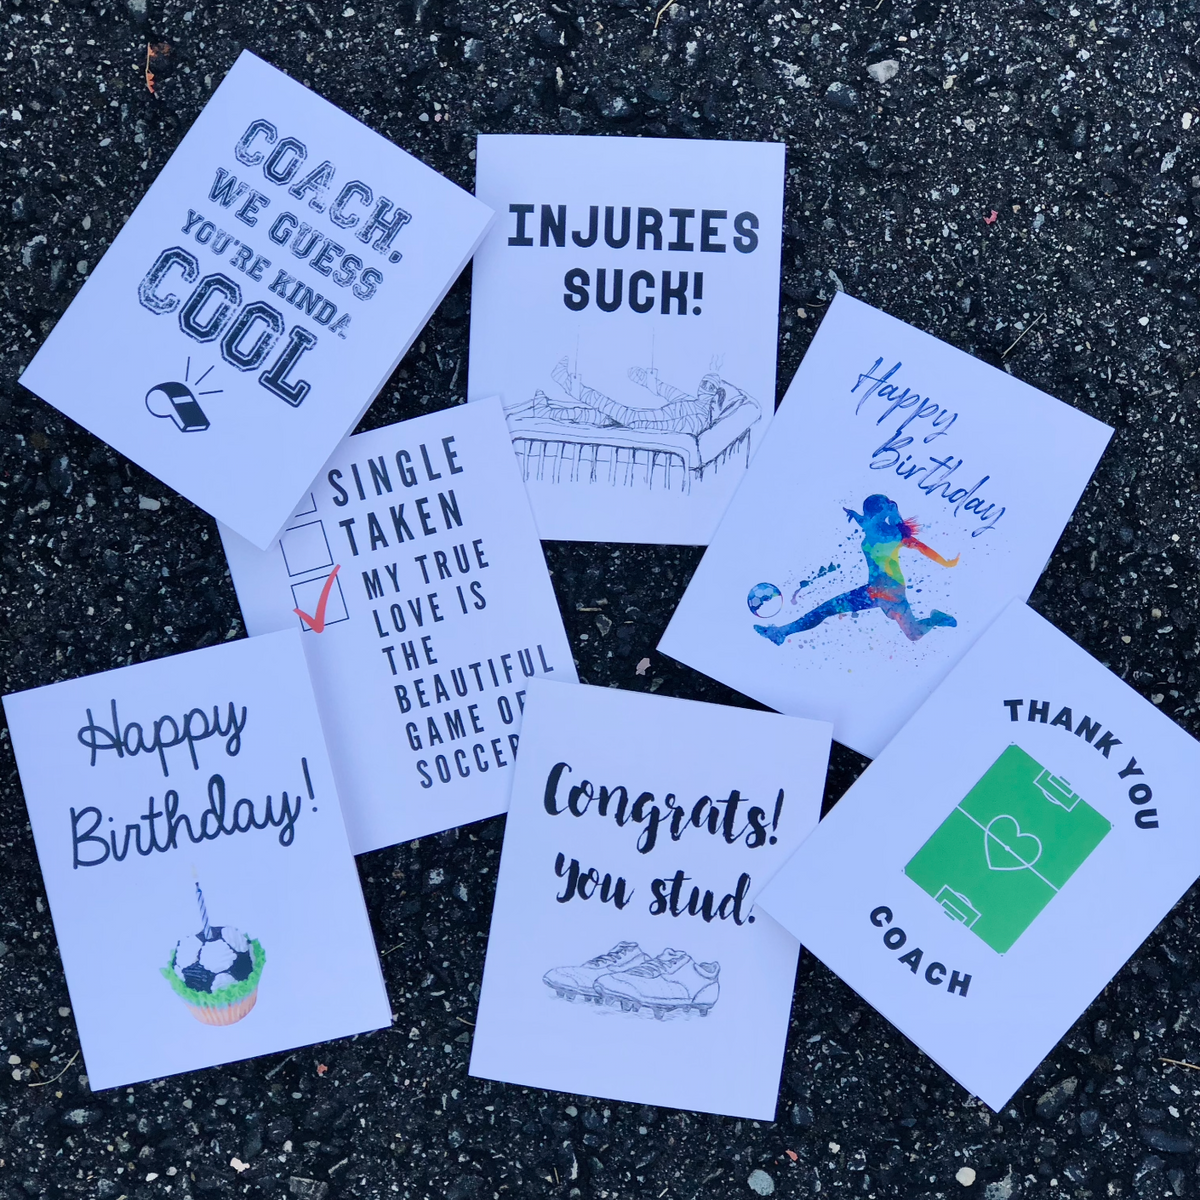 Soccer Greeting Cards for Birthdays, Injuries, Coaches, Congratulations